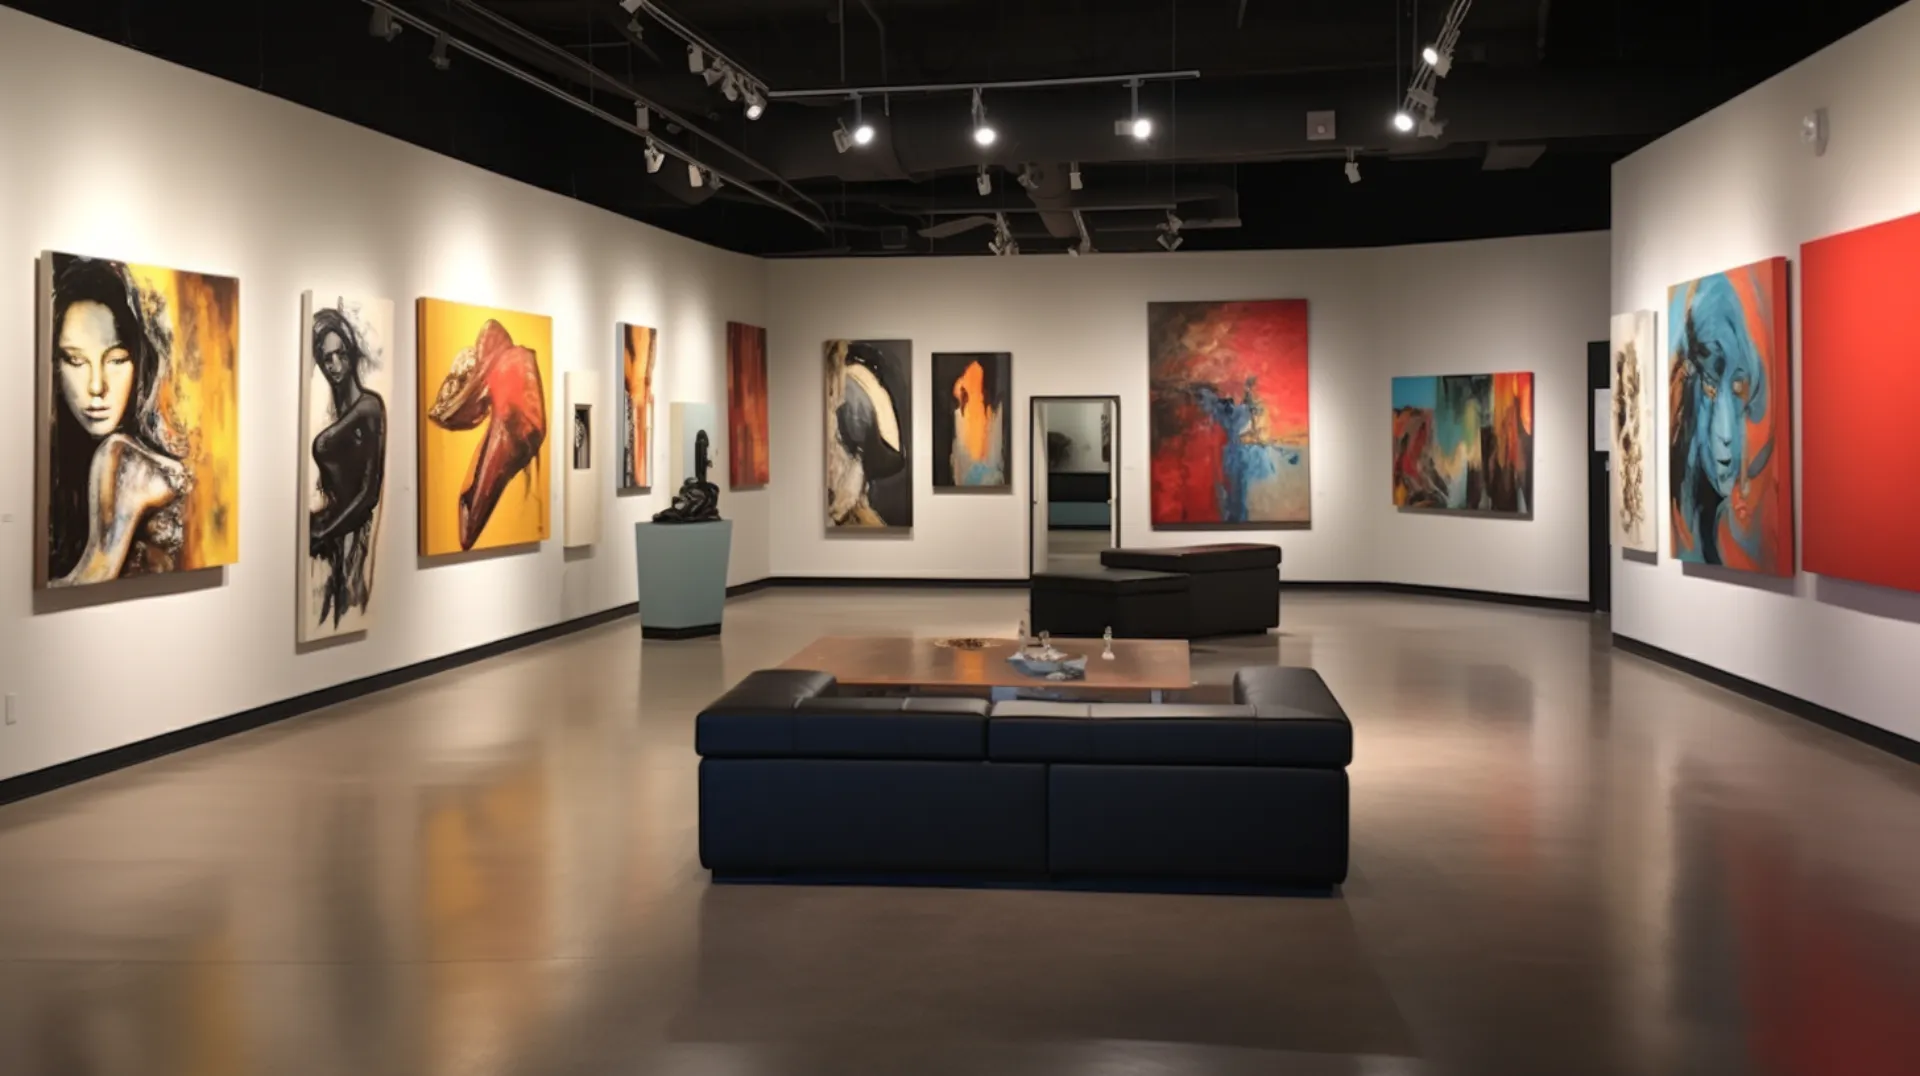 Custot Gallery Fine Art Showcase: A glimpse into the world of exquisite artistry on display at Custot Gallery, featuring contemporary and classical masterpieces